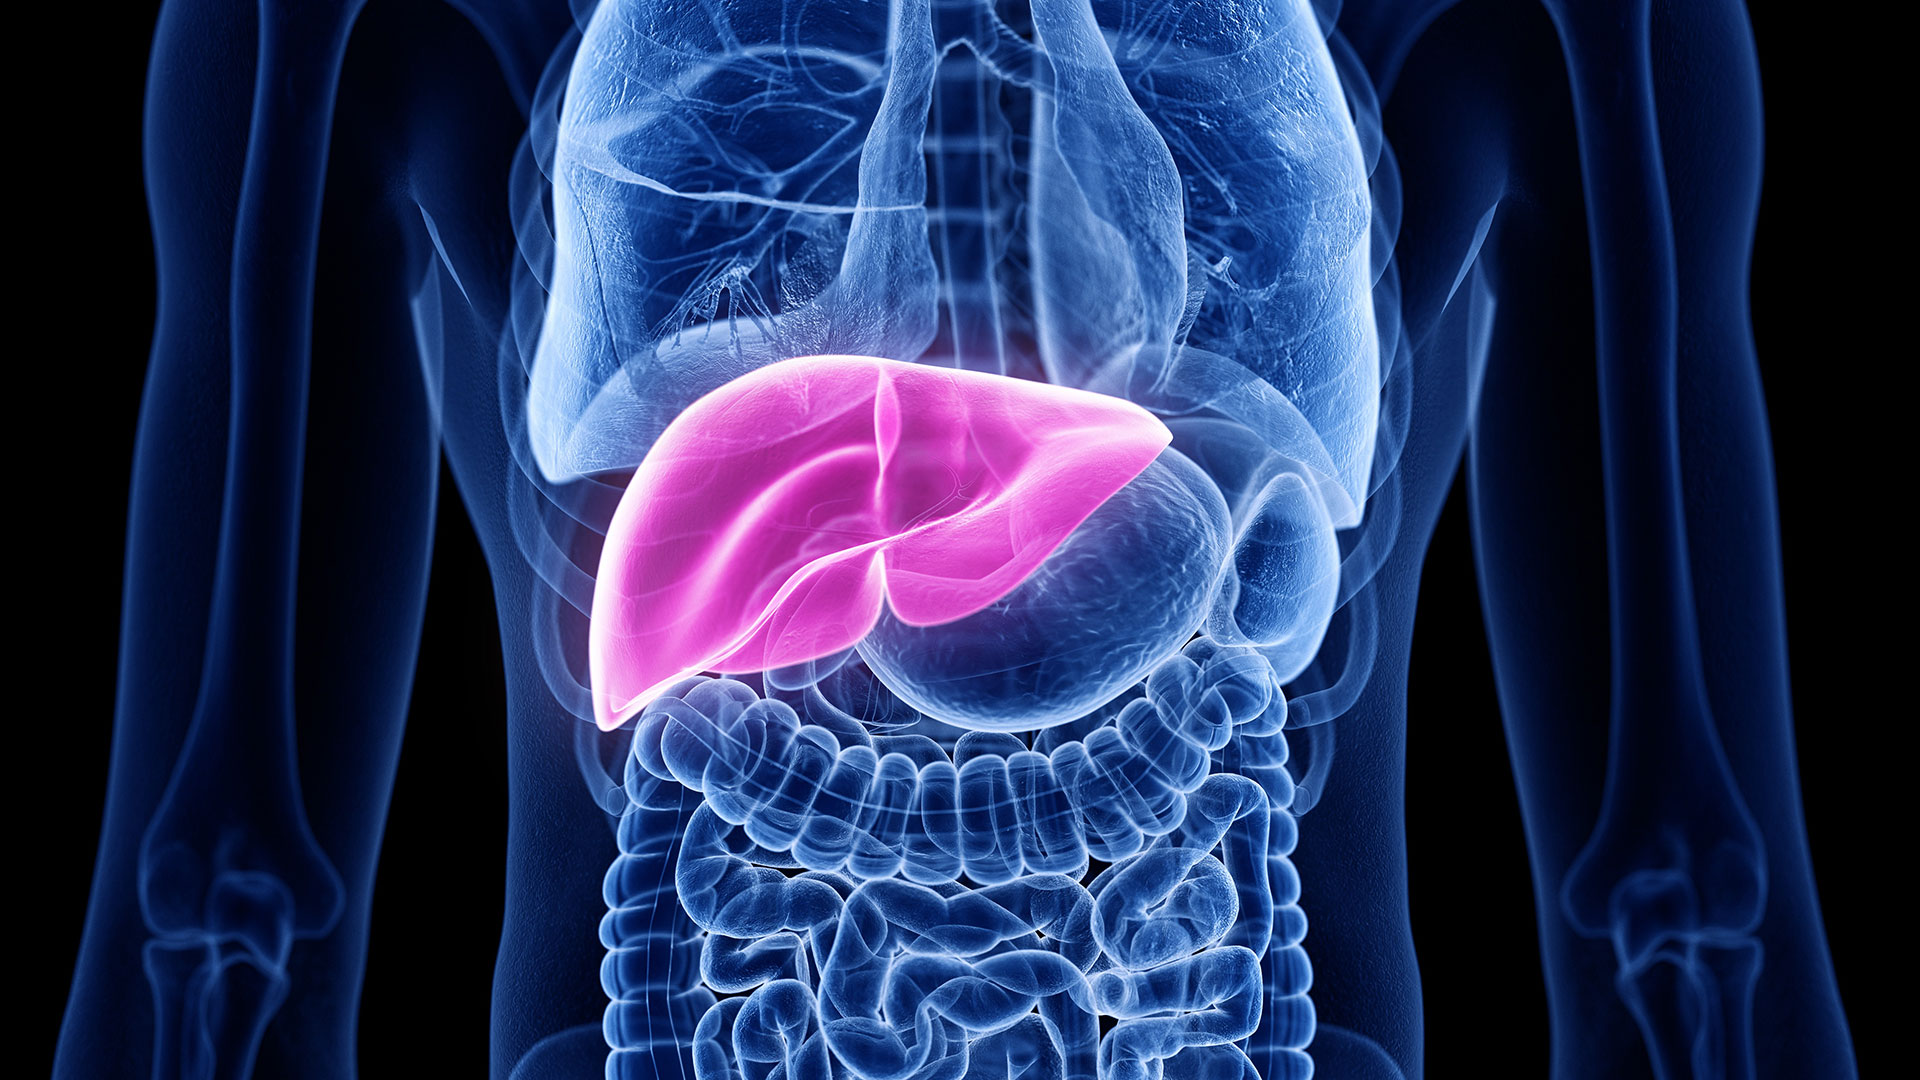 Targeting Nerves to the Liver as Potential Diabetes Treatment